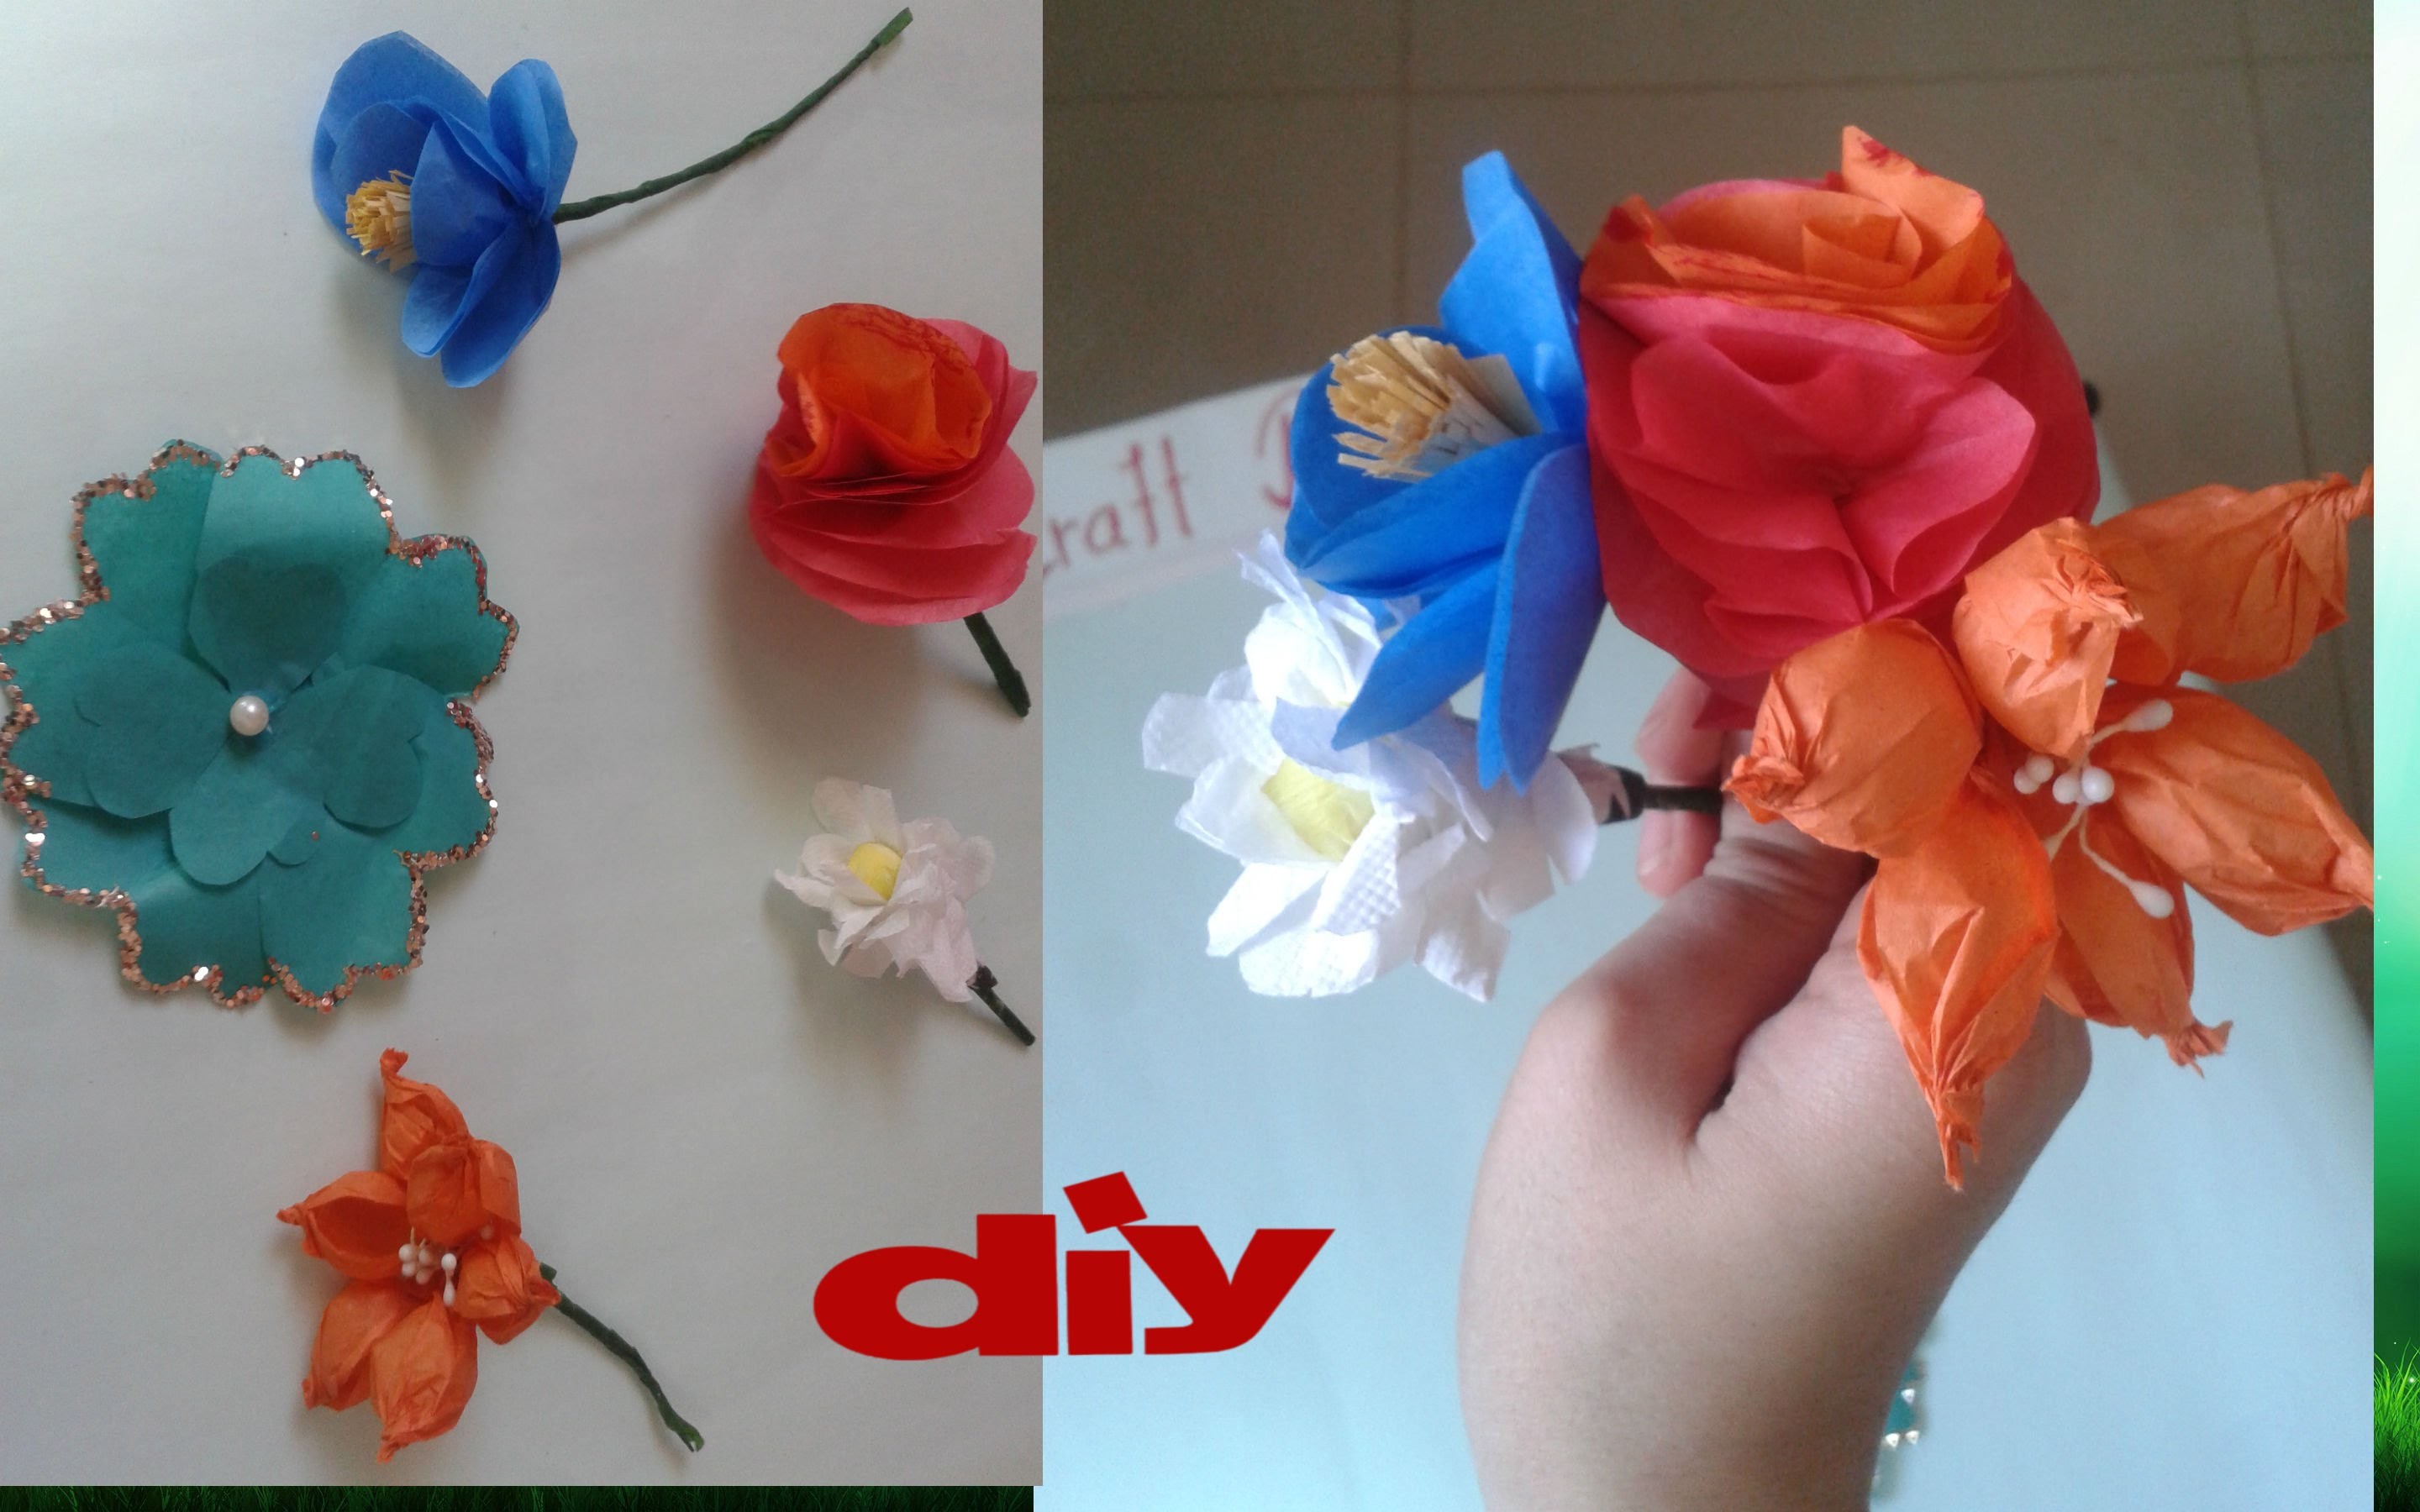 Diy 5 Types Of Tissue Paper Flowers (Easy to make)